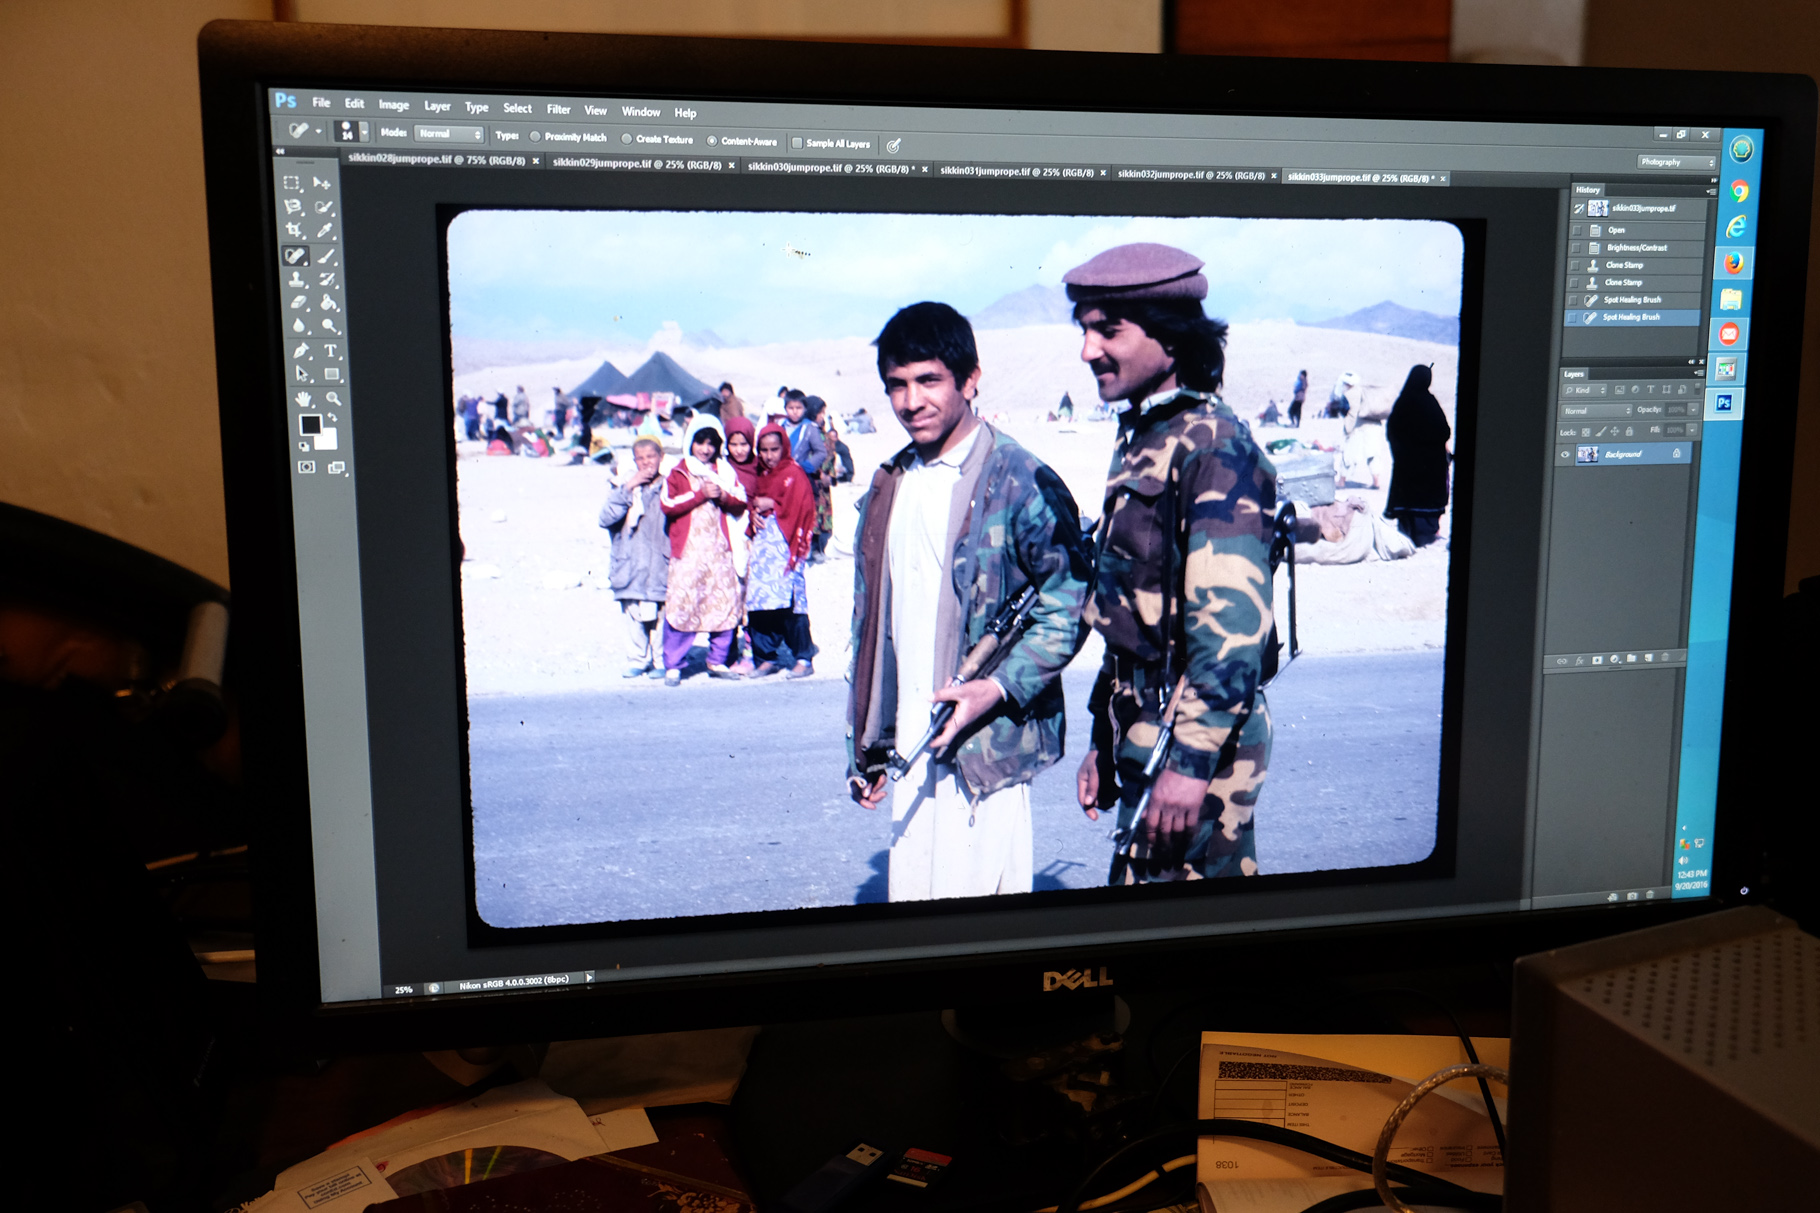 A photo of fighters in pre-Taliban Afghanistan by Schreibman.